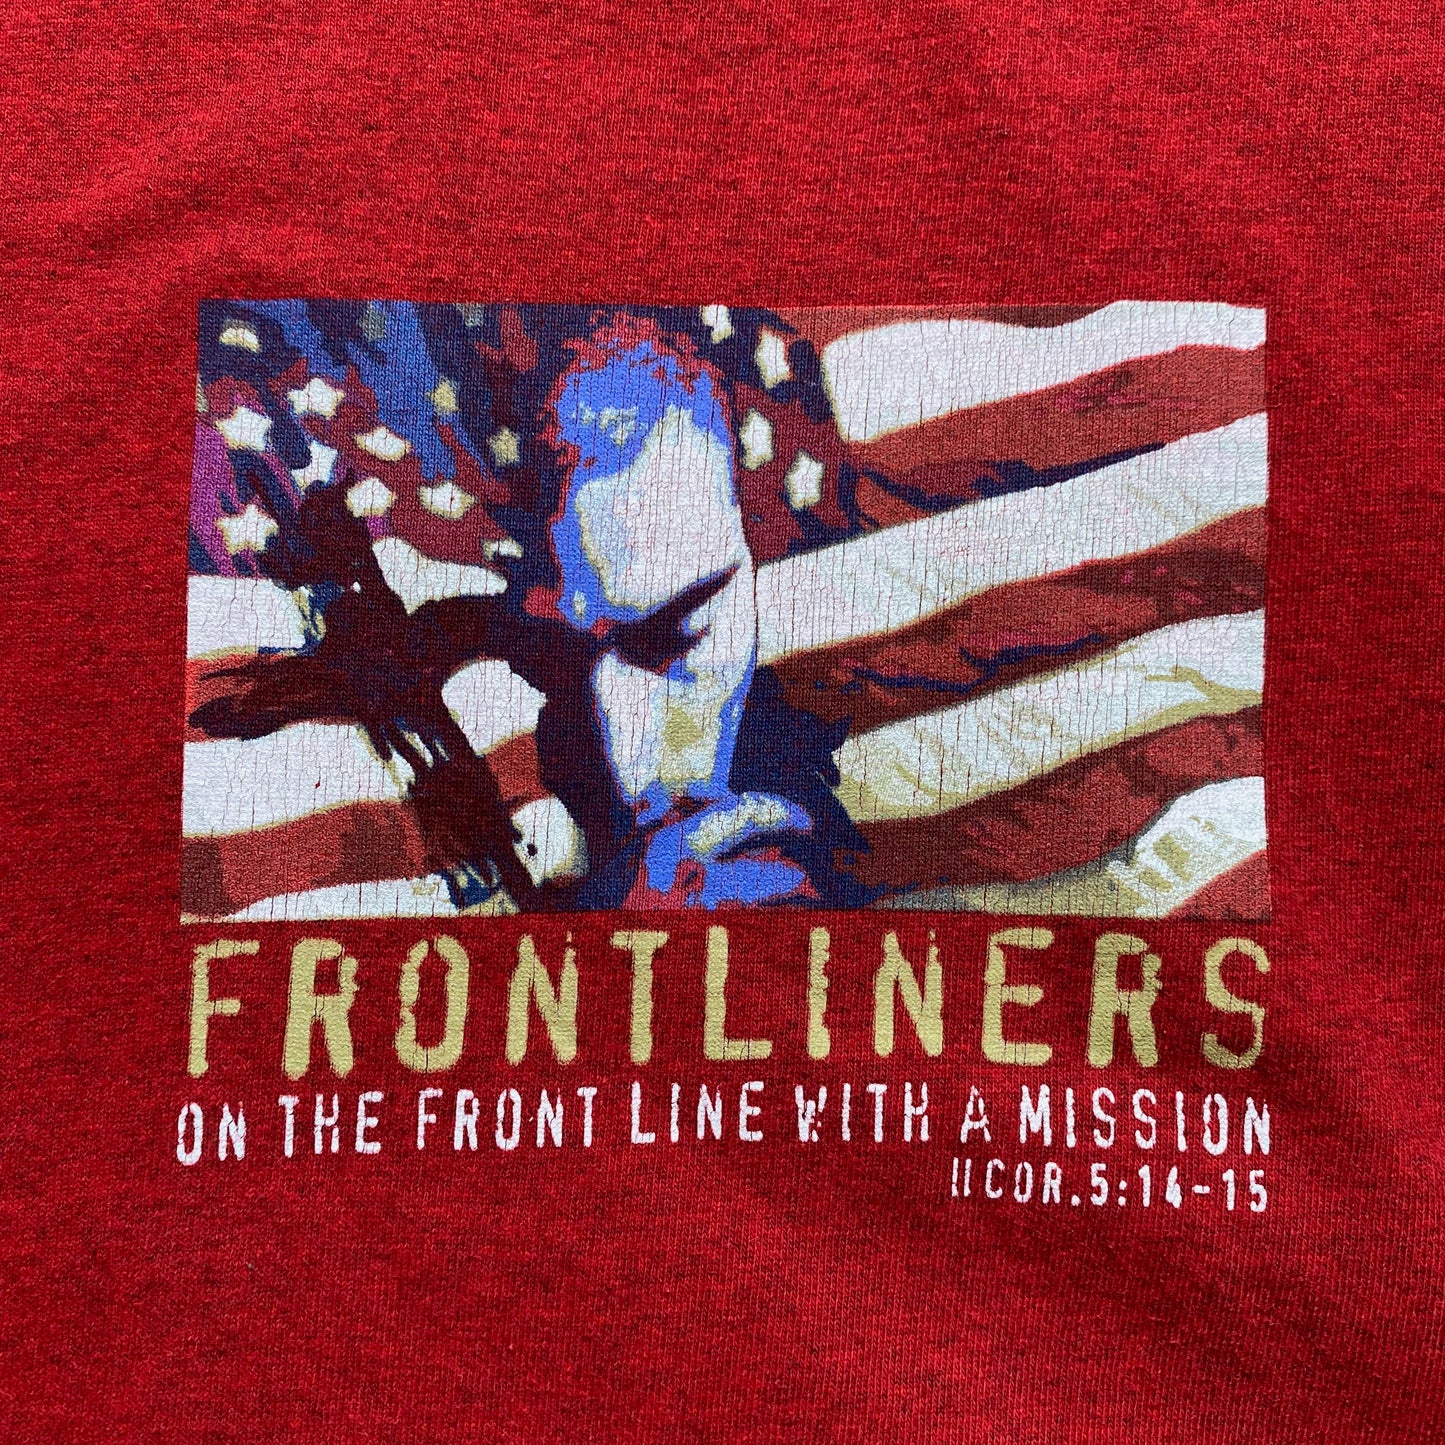 00's FRONTLINERS "Ⅱ COR 5:14-15" T-SHIRT